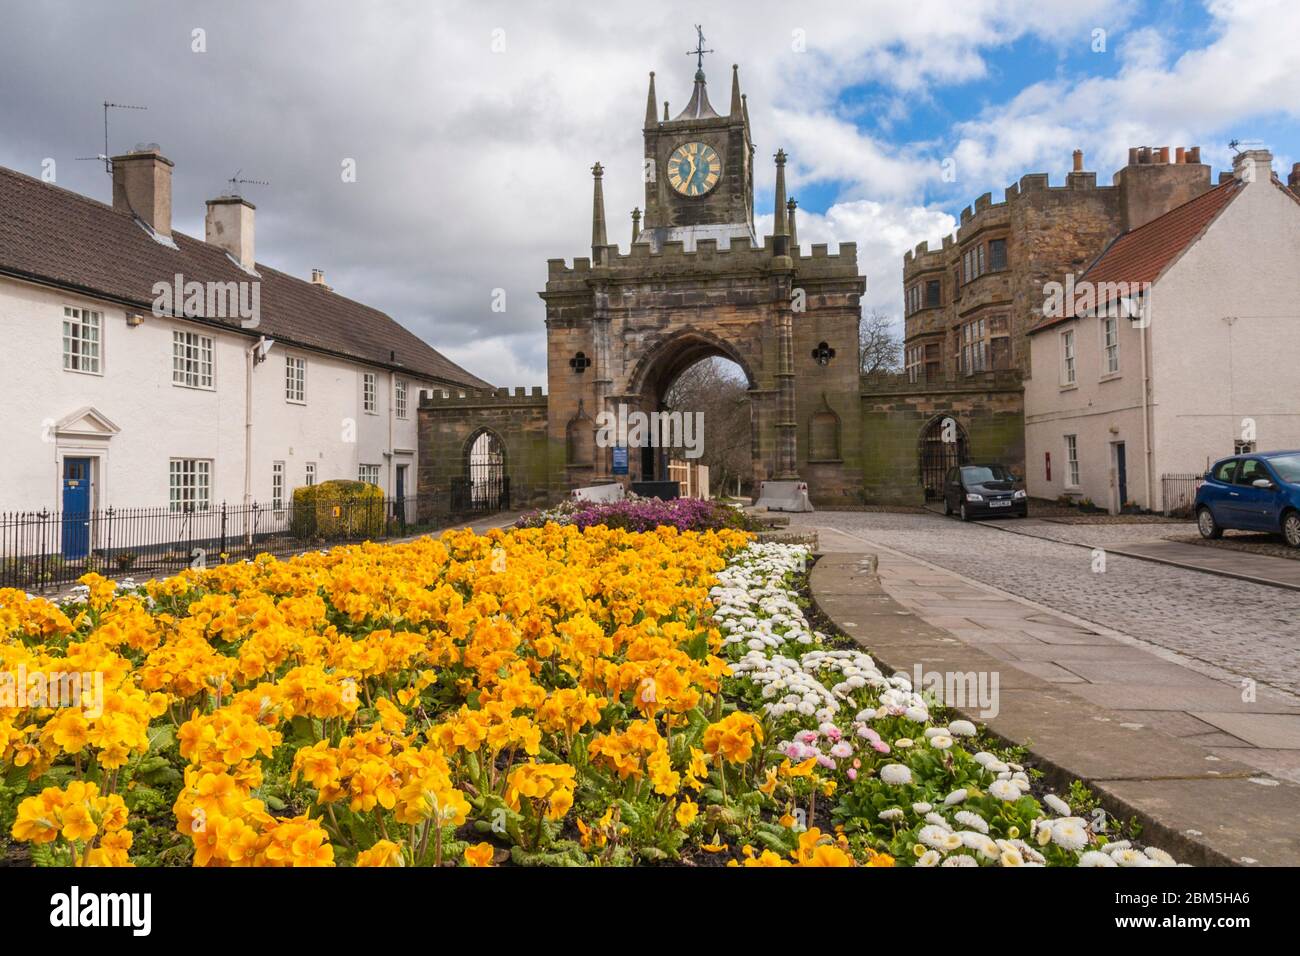 Entrance to Auckland Castle in Bishop Auckland,Co.Durham,England,UK showing the bright yellow flowers and blue moody skies Stock Photo